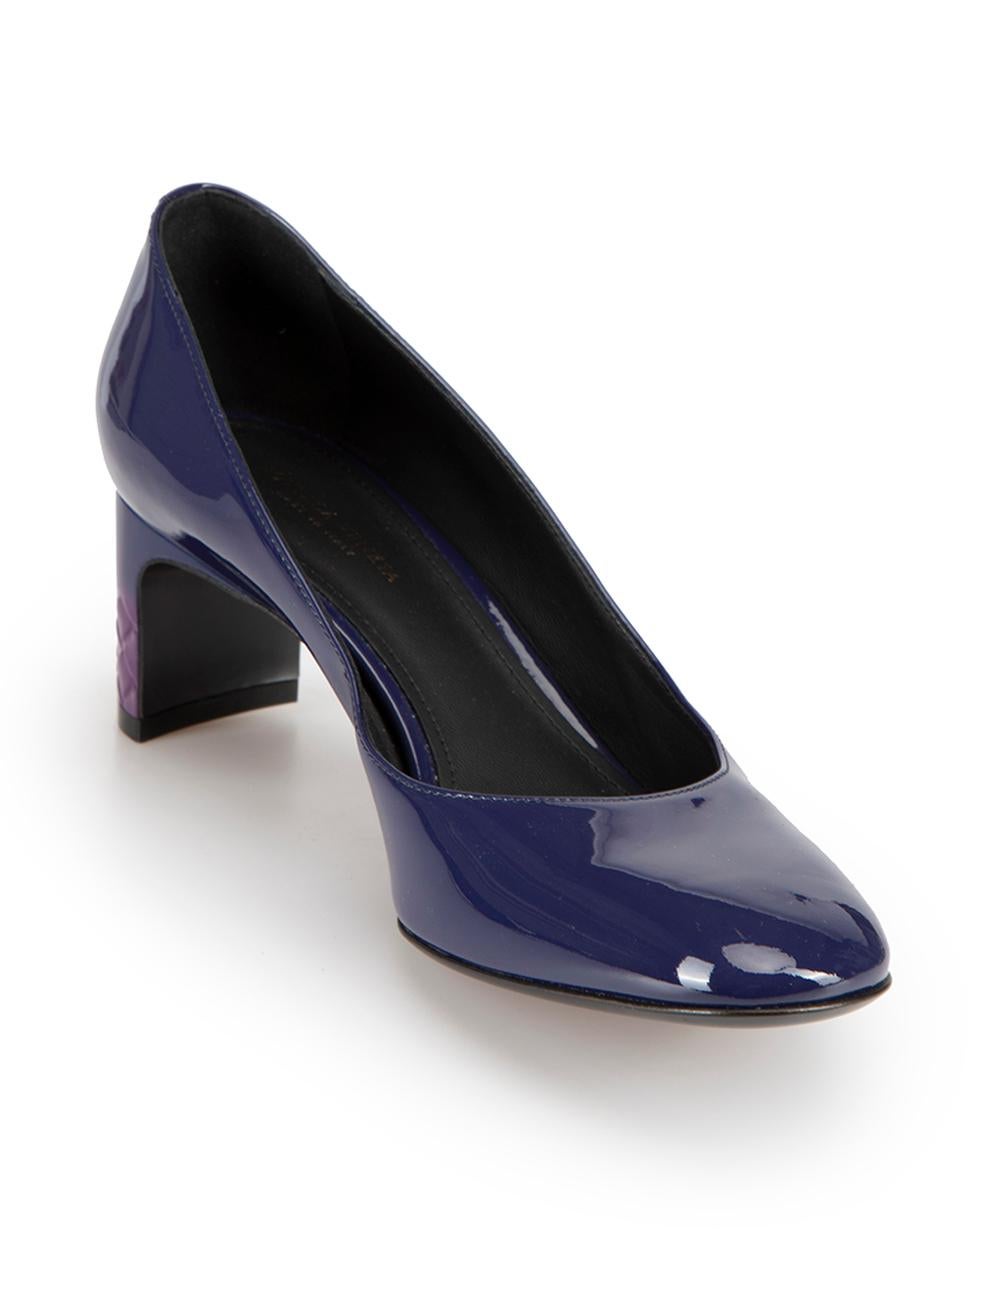 CONDITION is Very good. Hardly any visible wear to pumps is evident on this used Bottega Veneta designer resale item



Details


Deep blue

Patent leather

Slip-on pumps

Kitten heels

Round-toe

Ombré weave purple heel



 

Made in